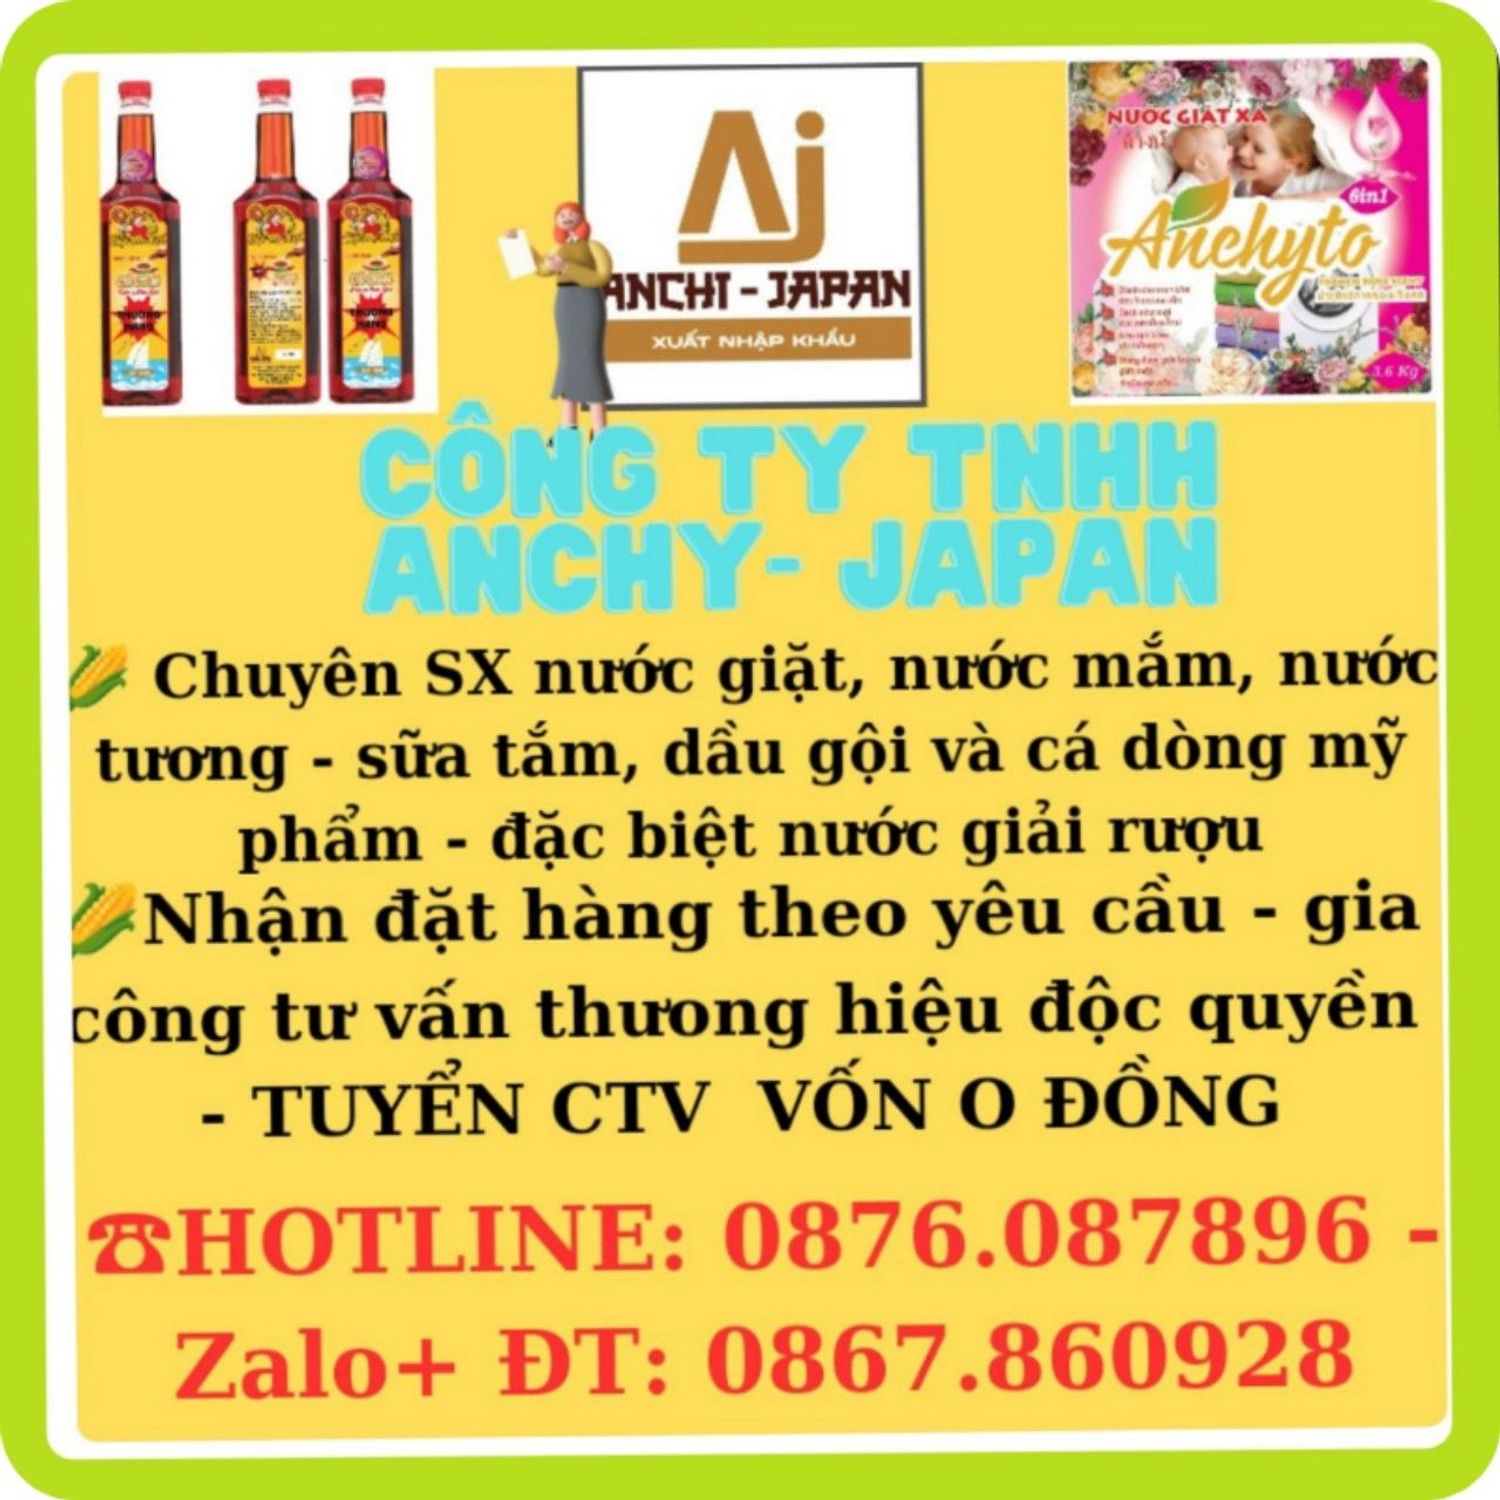 TỔNGVKHO ANCHY